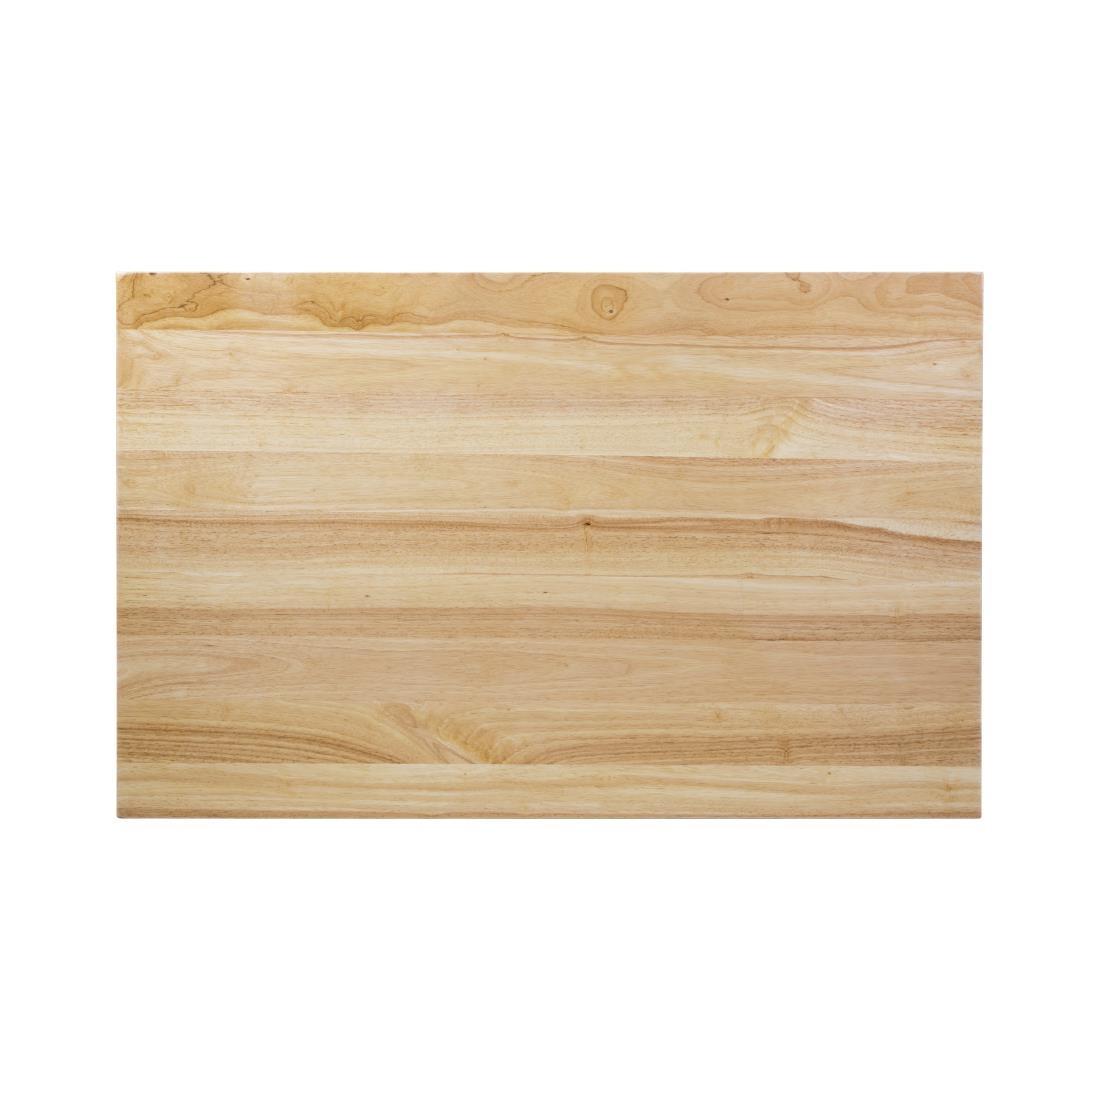 Bolero Pre-drilled Rectangular Table Top Natural 1100 x 700mm - DY727  - 1